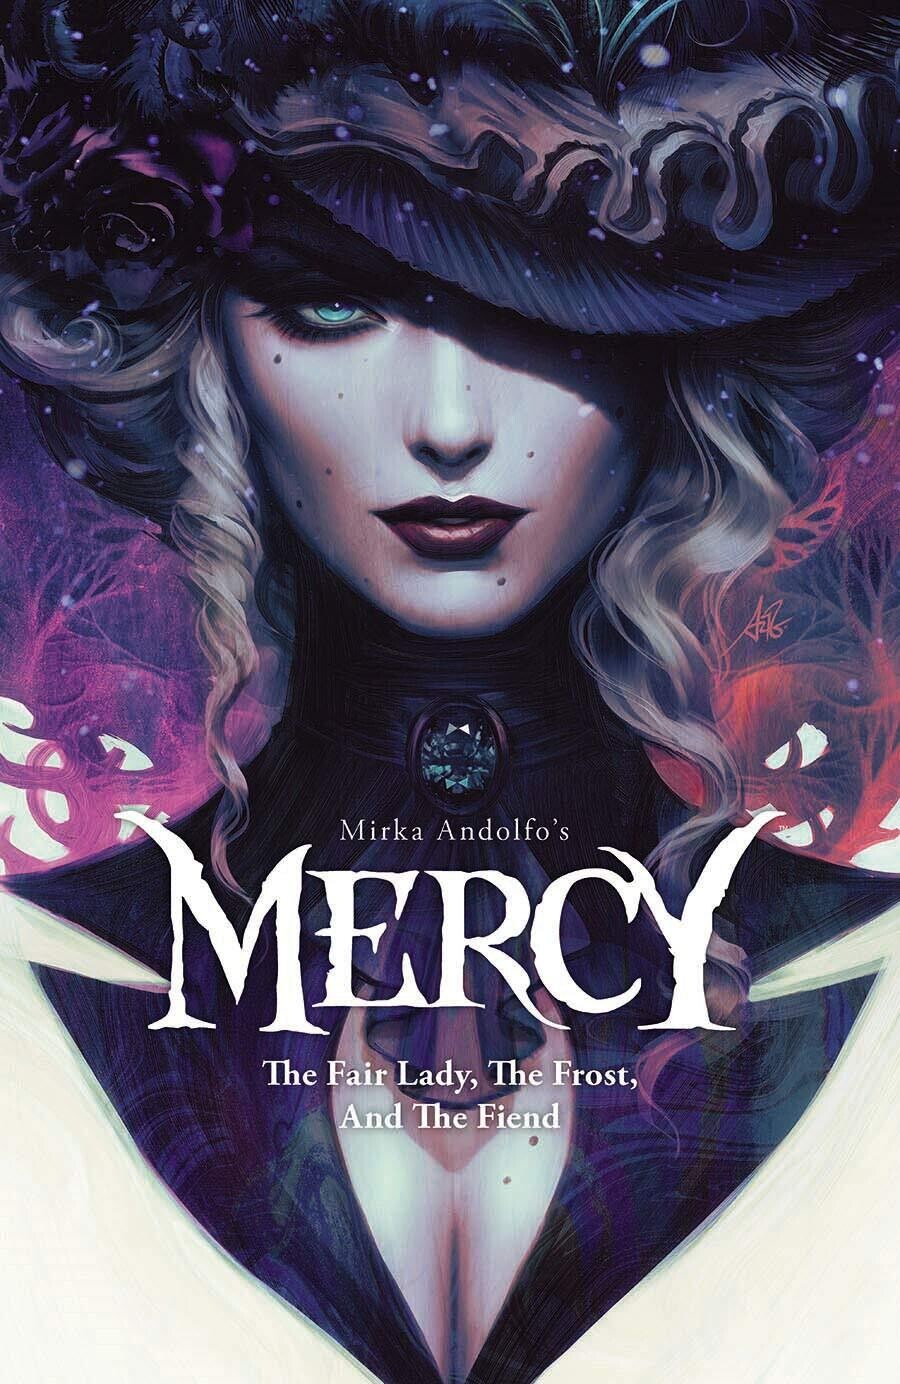 Mercy Vol. 1: The Fair Lady, The Frost, And The Fiend